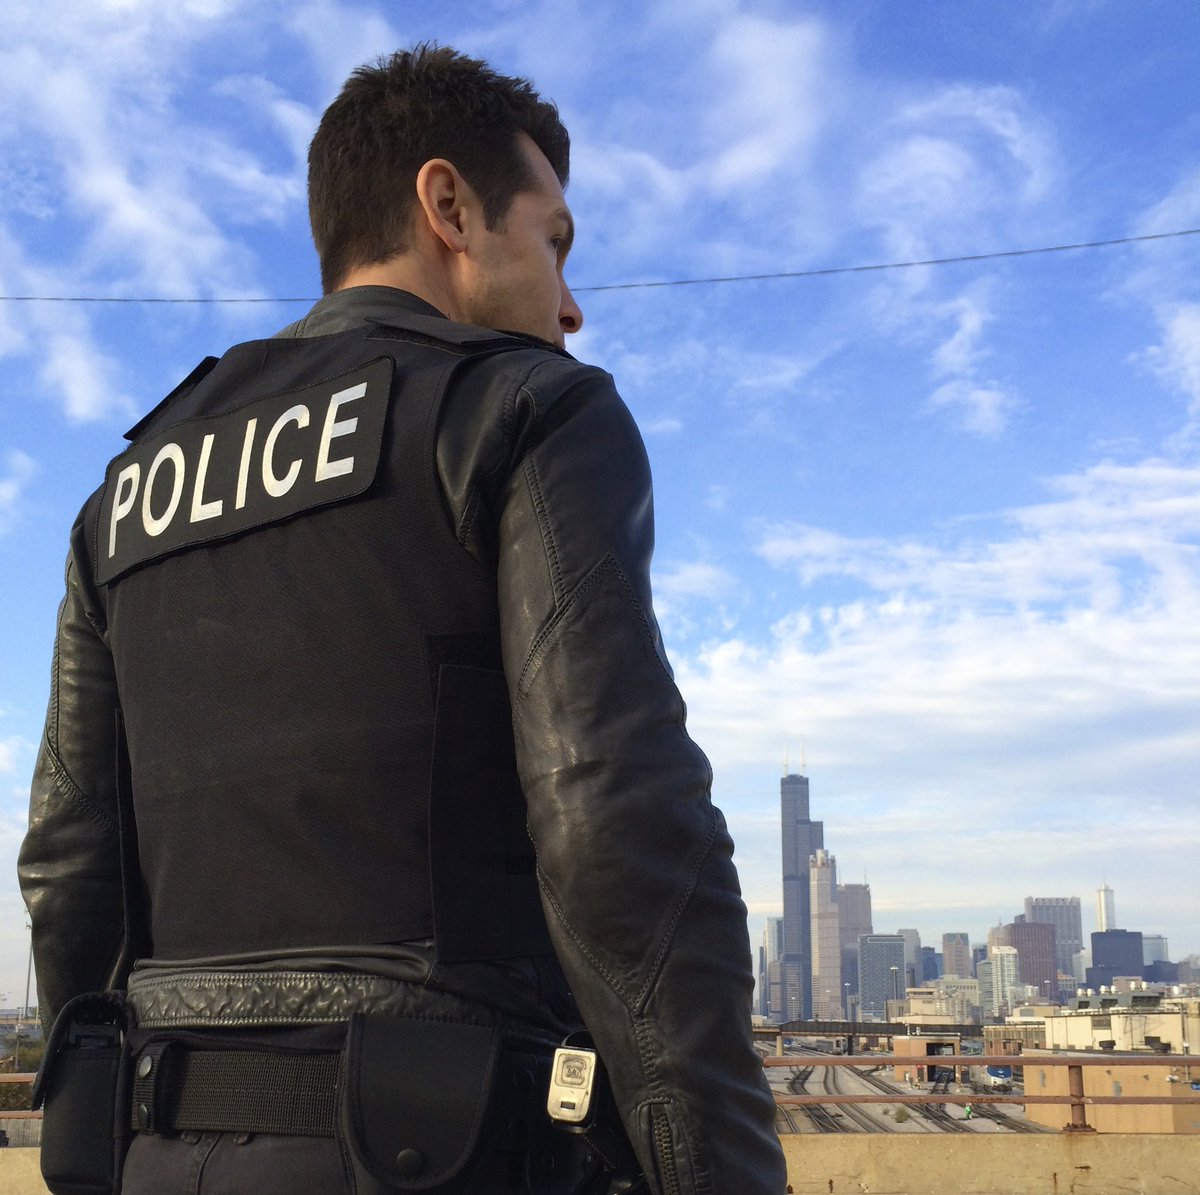 It’s been an honor portraying Det. Antonio Dawson in the #OneChicago world. To my cast #Family, I’ll always treasure the time and stories we shared. To all you #chihards out there, THANK YOU for being the best of fans! We’ll Always have CHICAGO 👊🏻